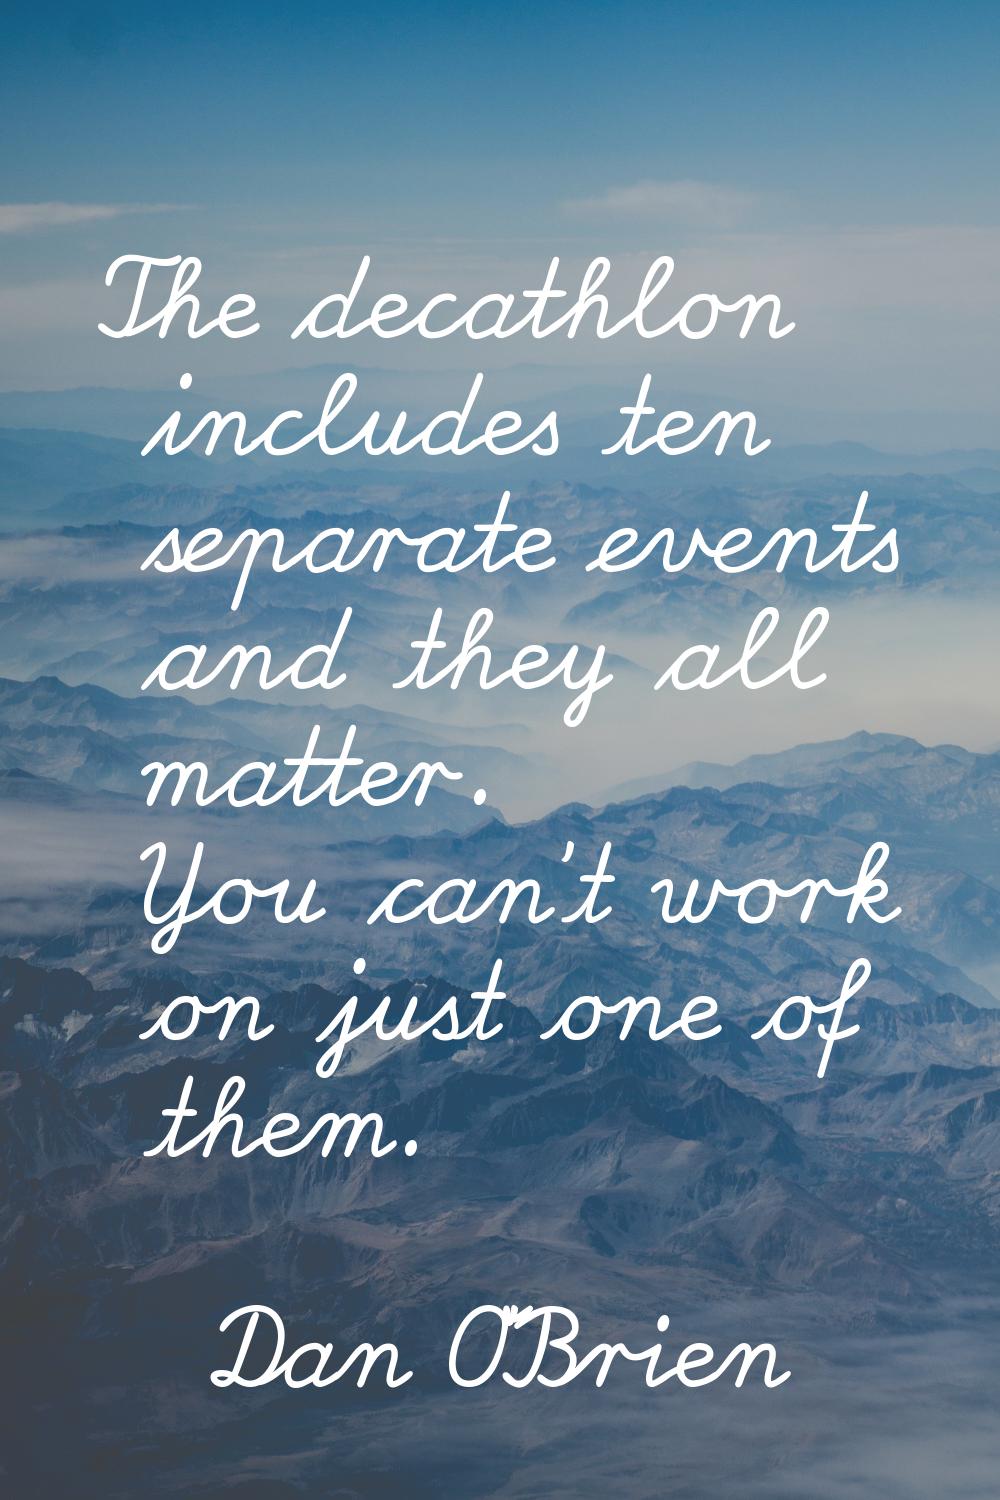 The decathlon includes ten separate events and they all matter. You can't work on just one of them.